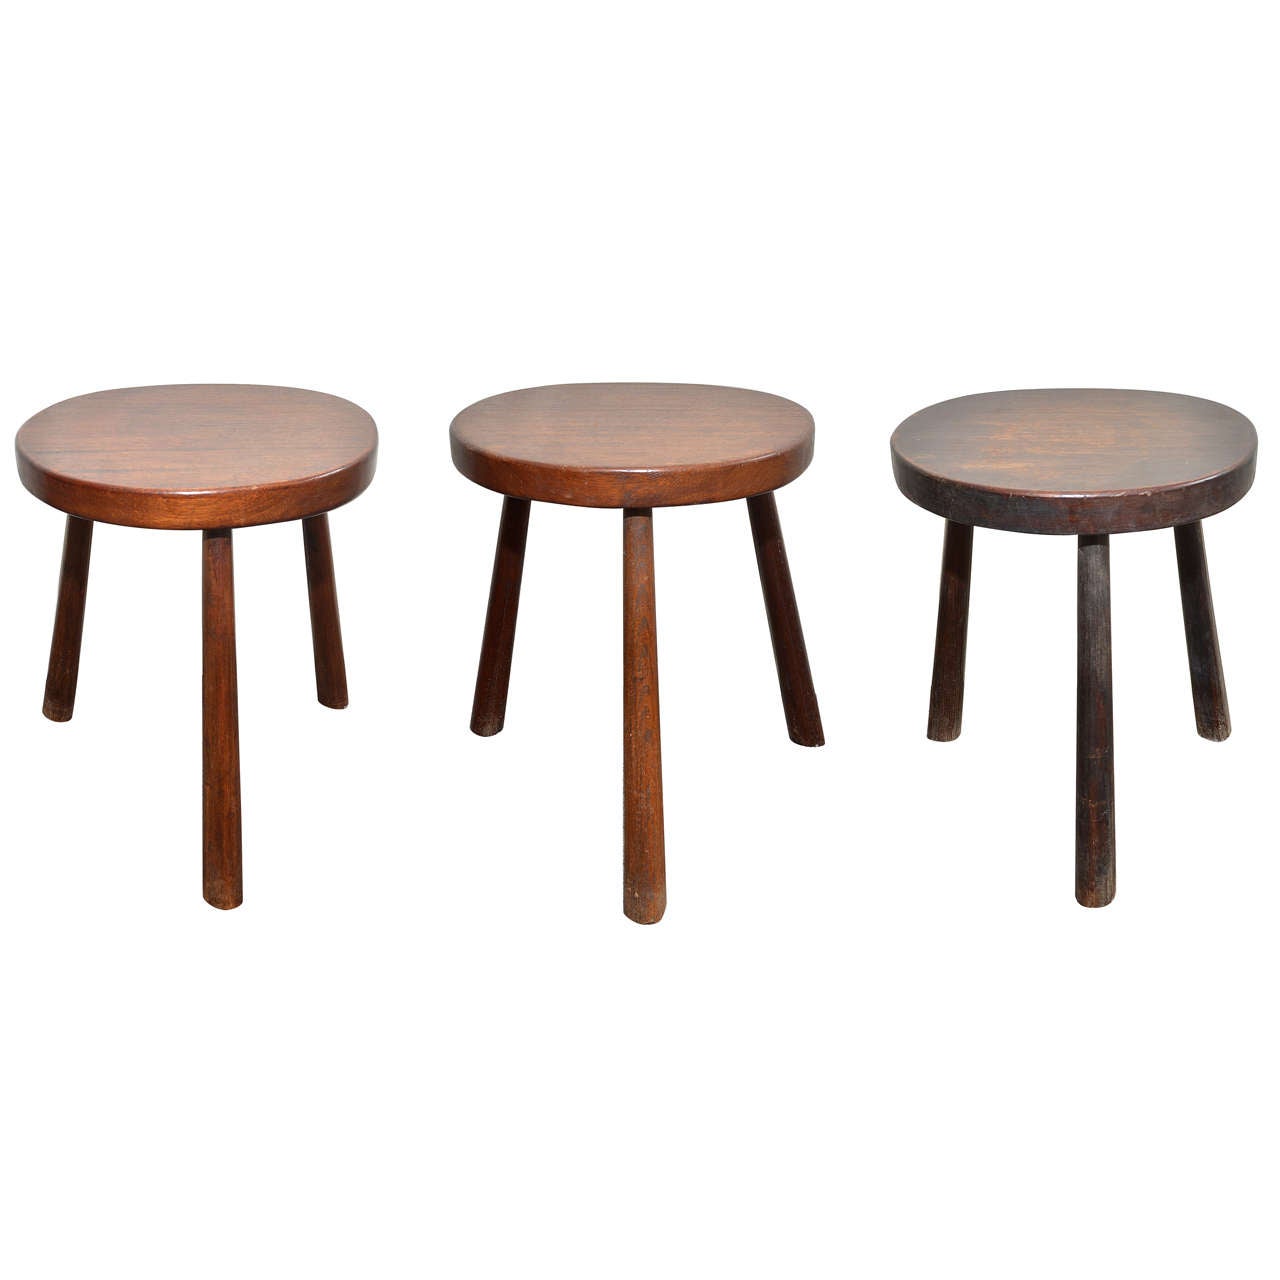 Three 1950s Stools For Sale